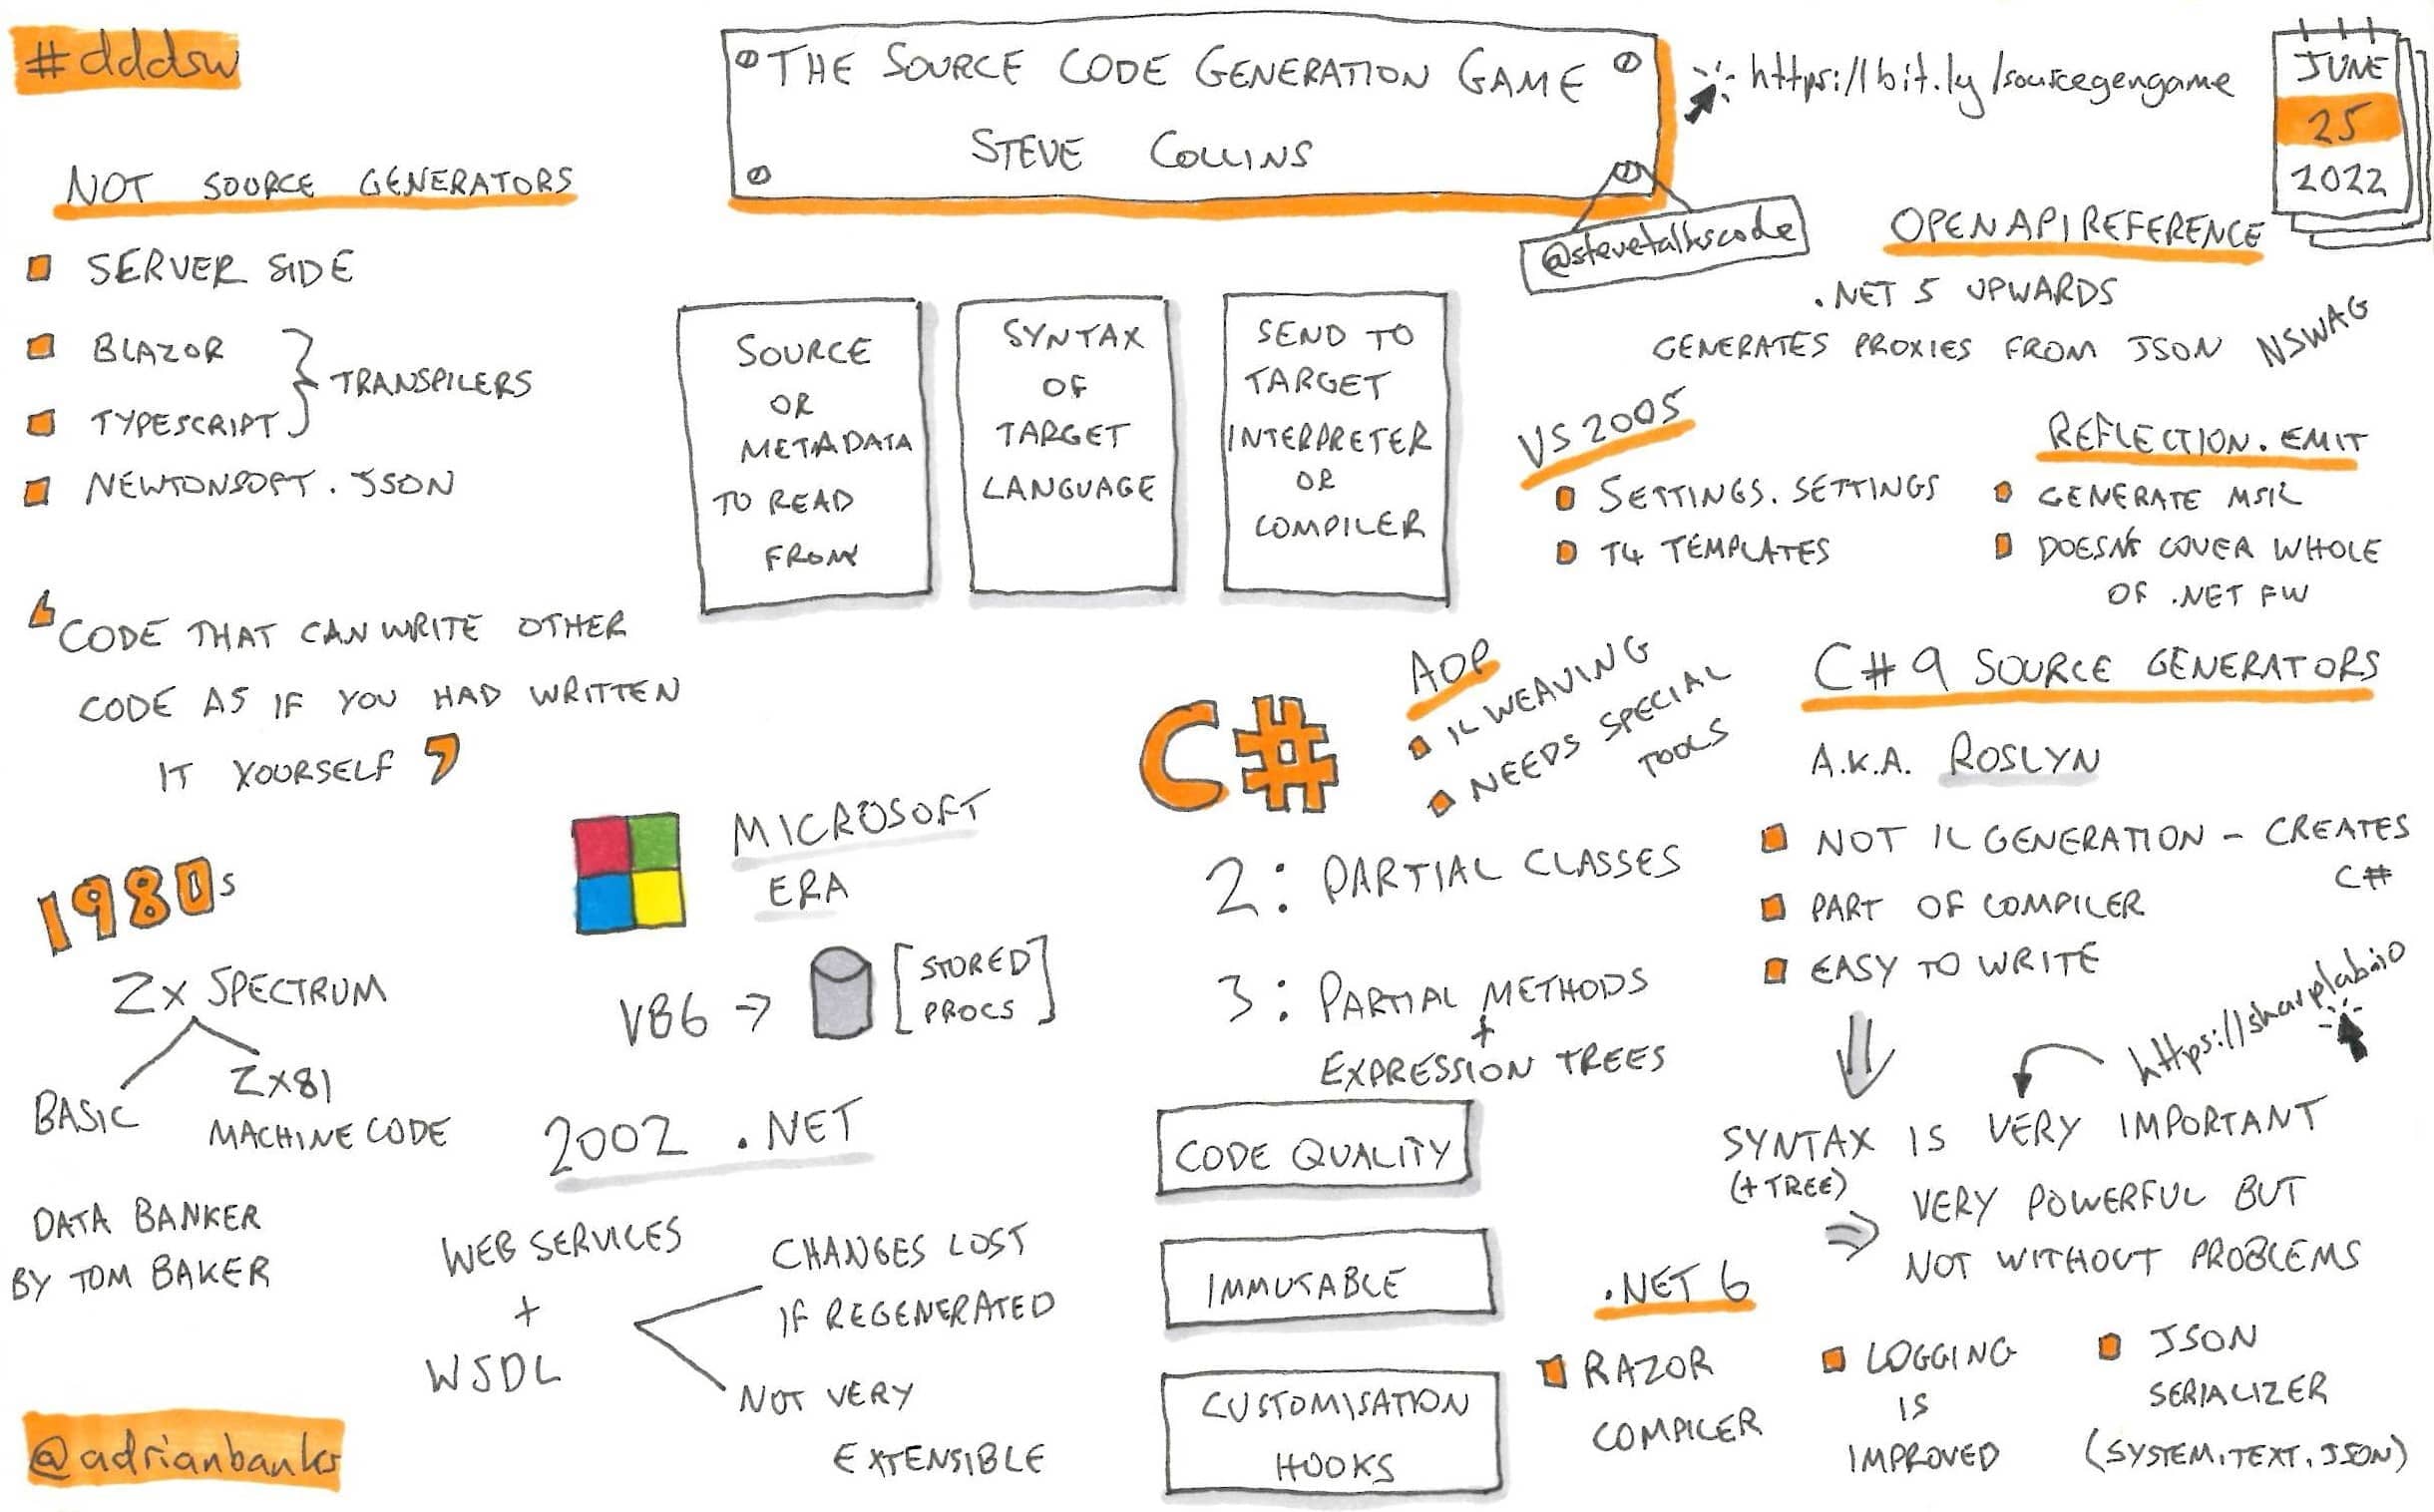 The Source Code Generation Game by Steve Collins